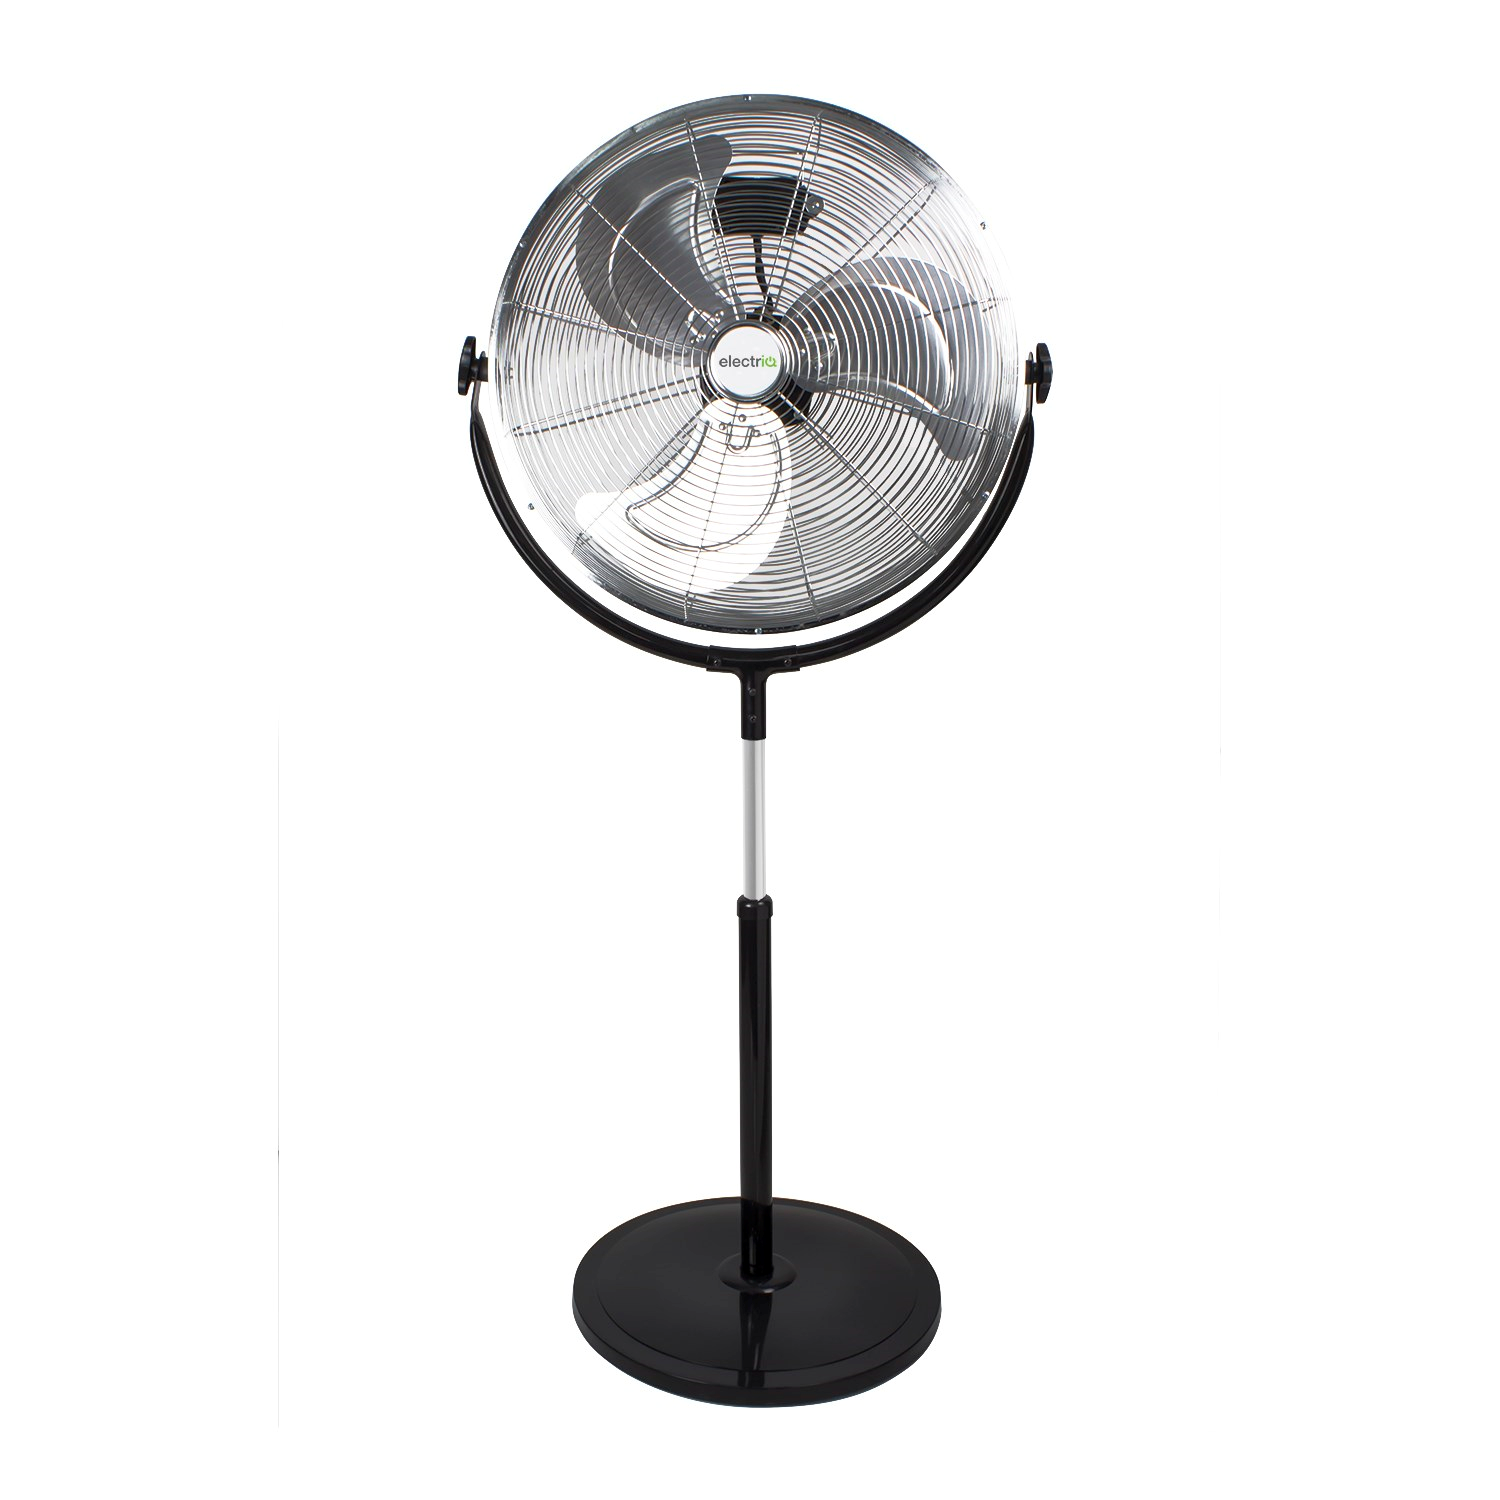 Refurbished electriQ 16 Inch High Velocity Pedestal Fan with Adjustable Stand Black and Chrome